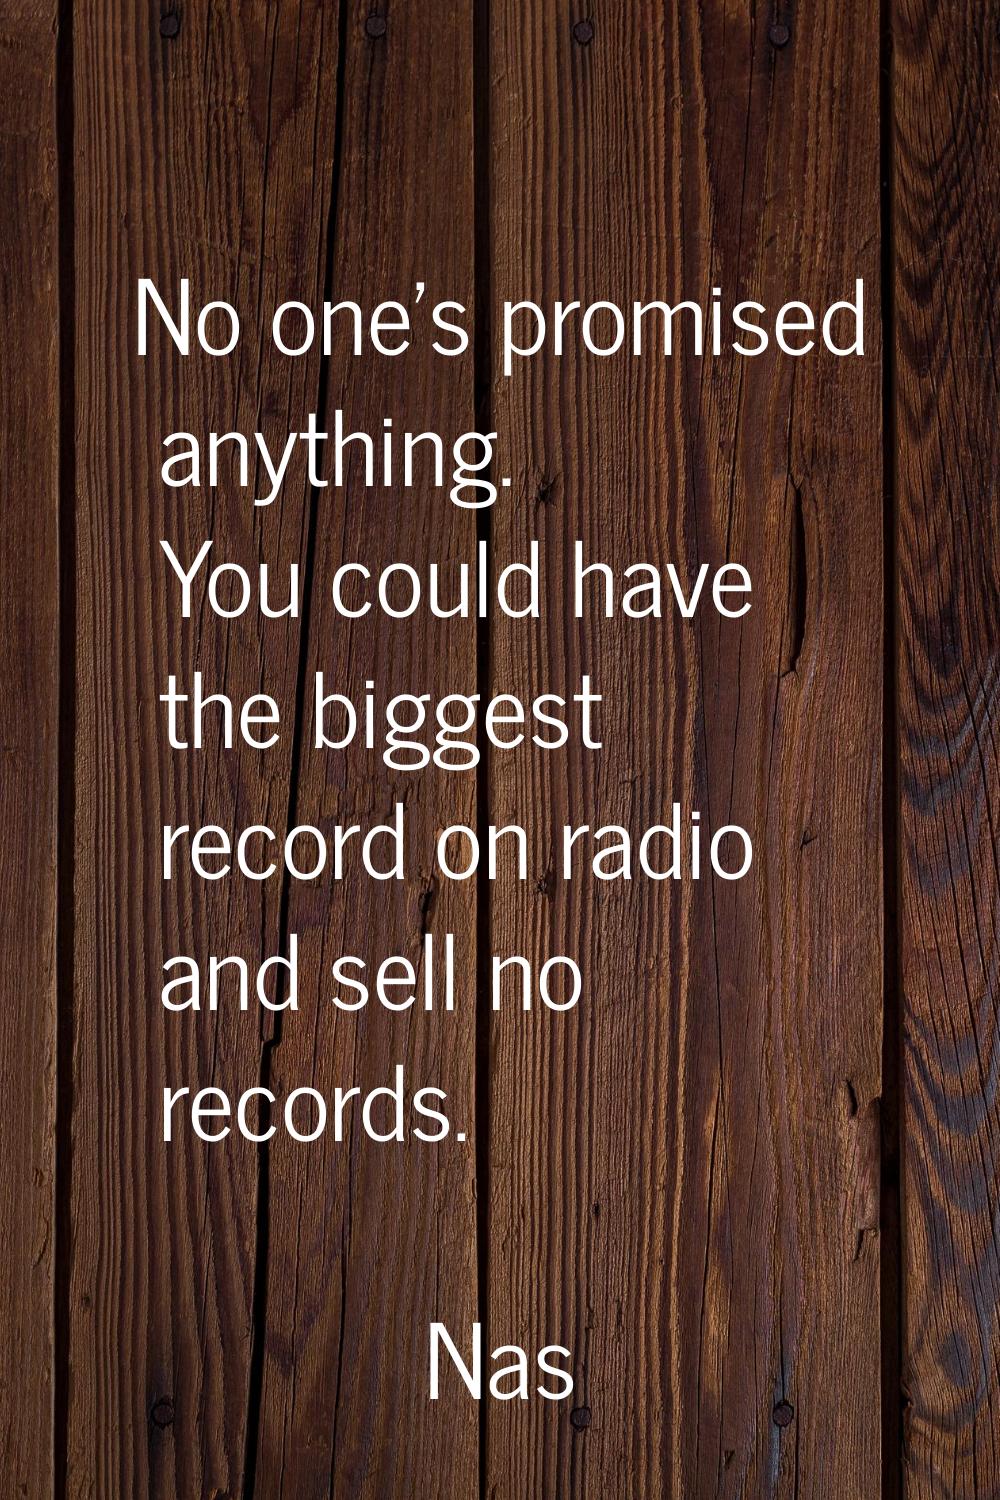 No one's promised anything. You could have the biggest record on radio and sell no records.